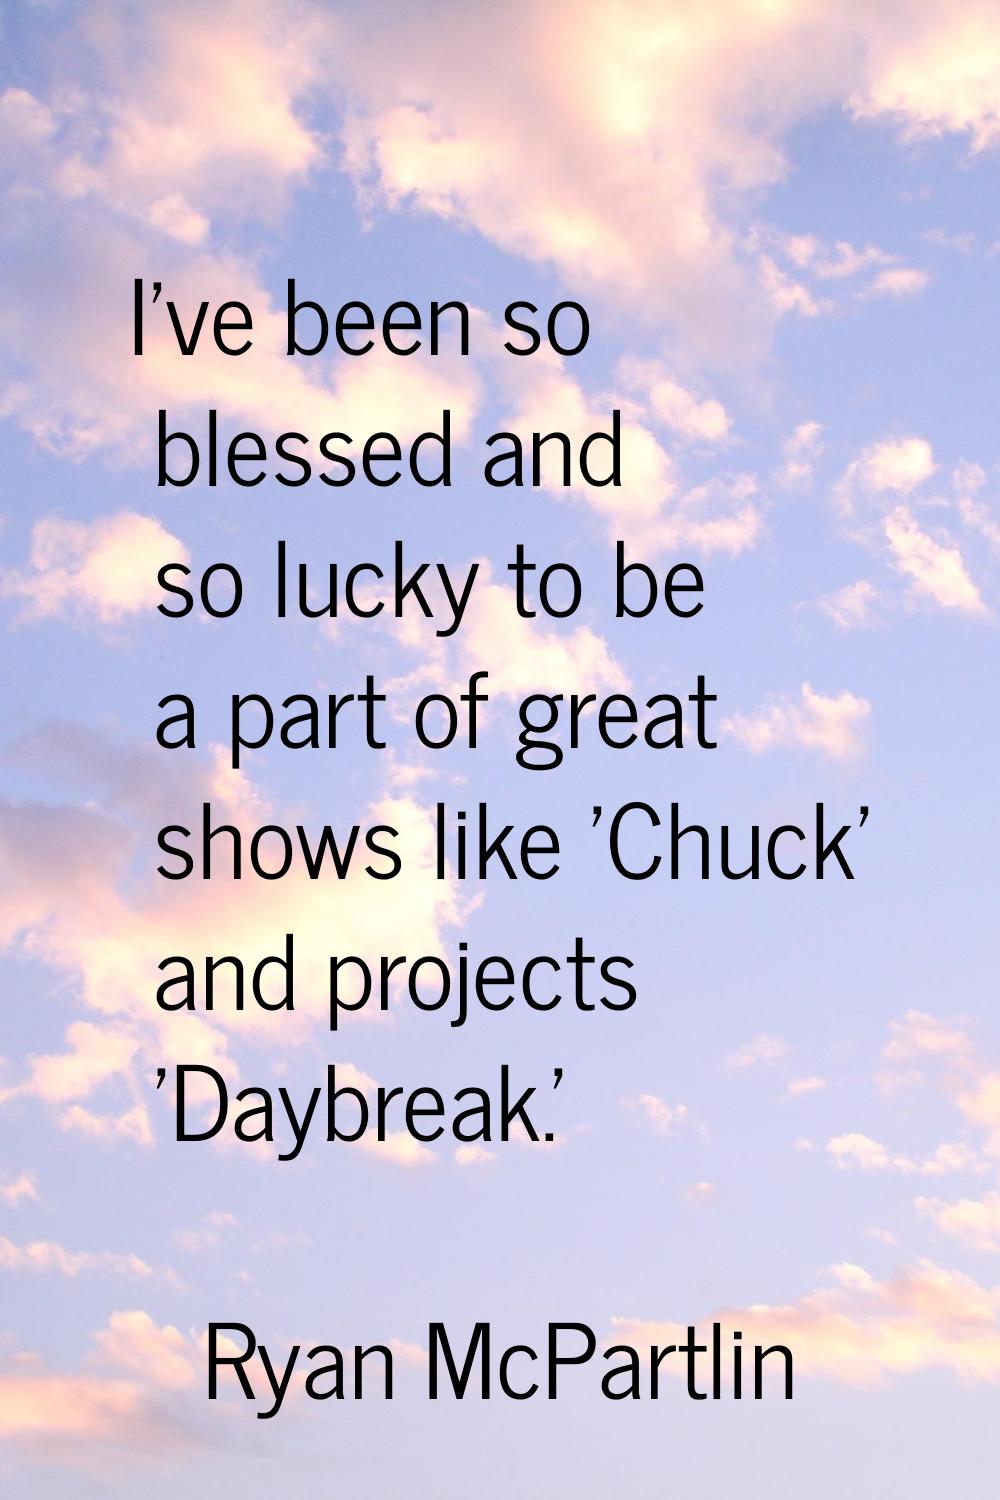 I've been so blessed and so lucky to be a part of great shows like 'Chuck' and projects 'Daybreak.'